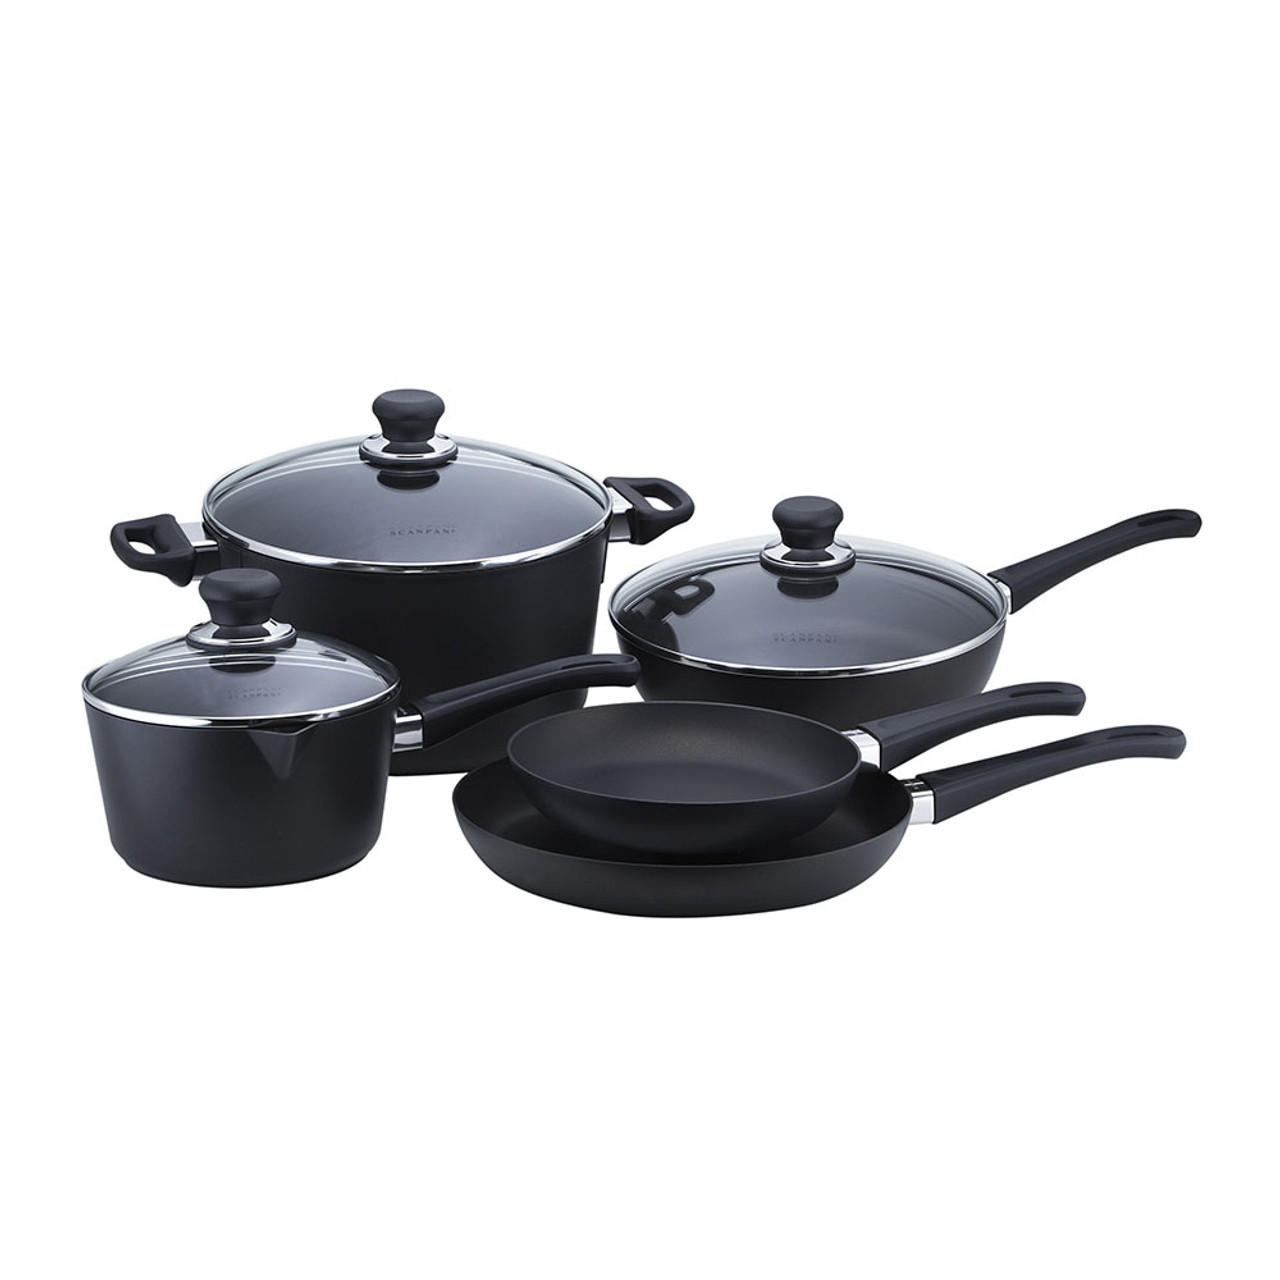 https://cdn11.bigcommerce.com/s-hccytny0od/images/stencil/1280x1280/products/421/4175/scanpan-classic-8-piece-cookware-set__07205.1515013802.jpg?c=2?imbypass=on